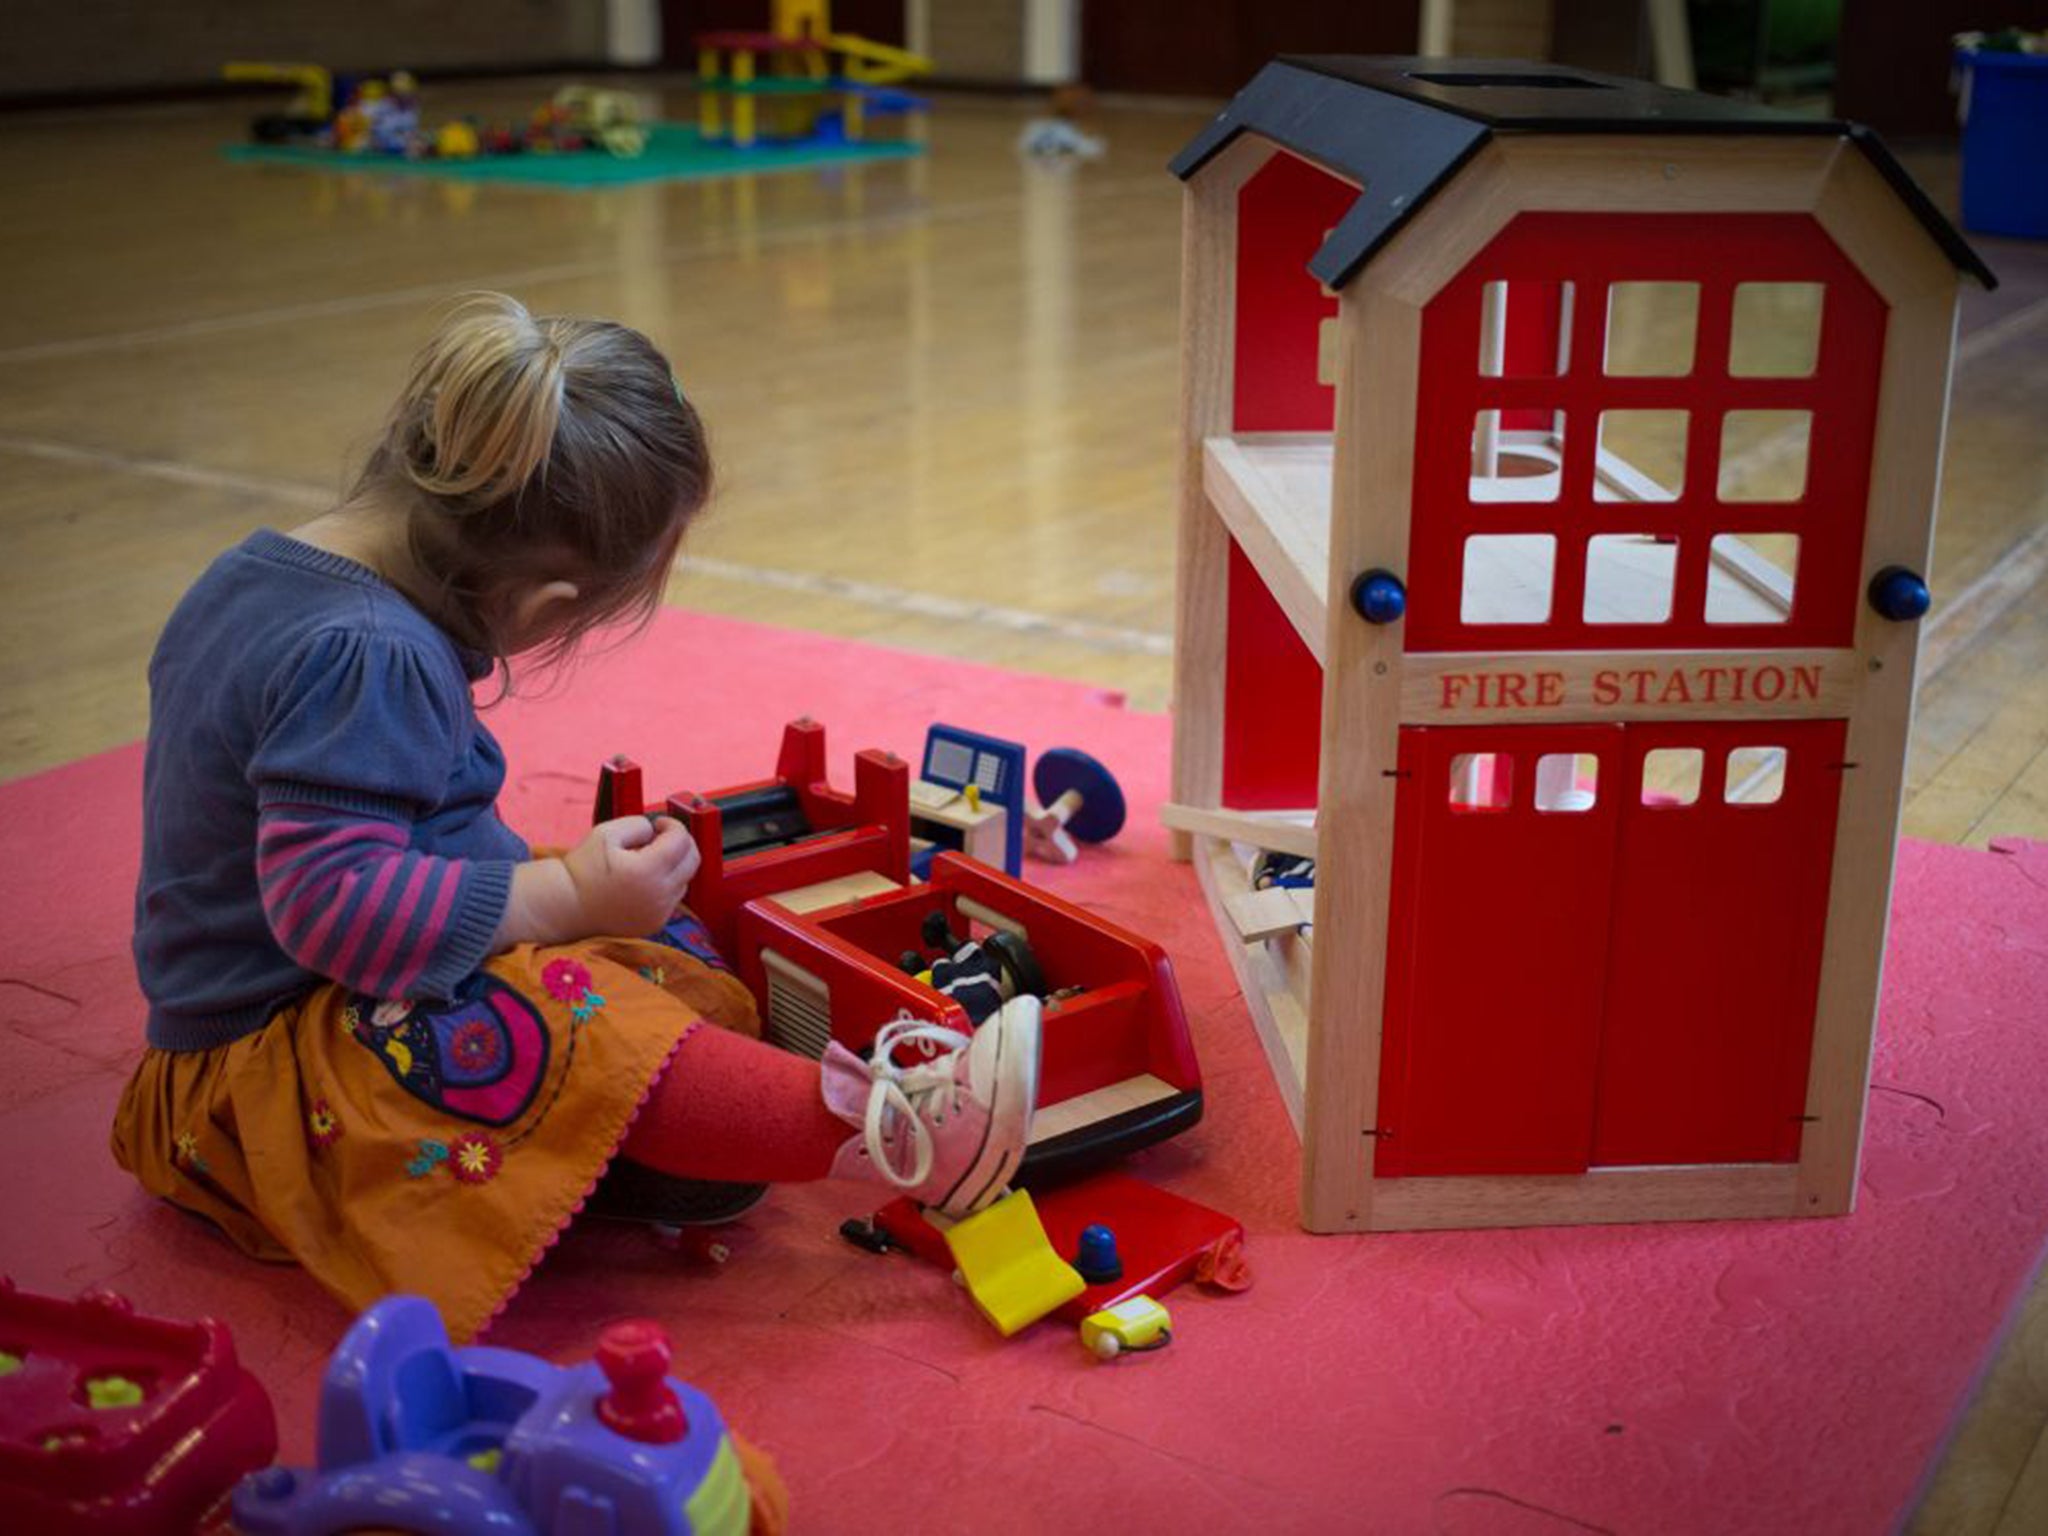 The Bill to provide 30 hours of free childcare is widely criticised 